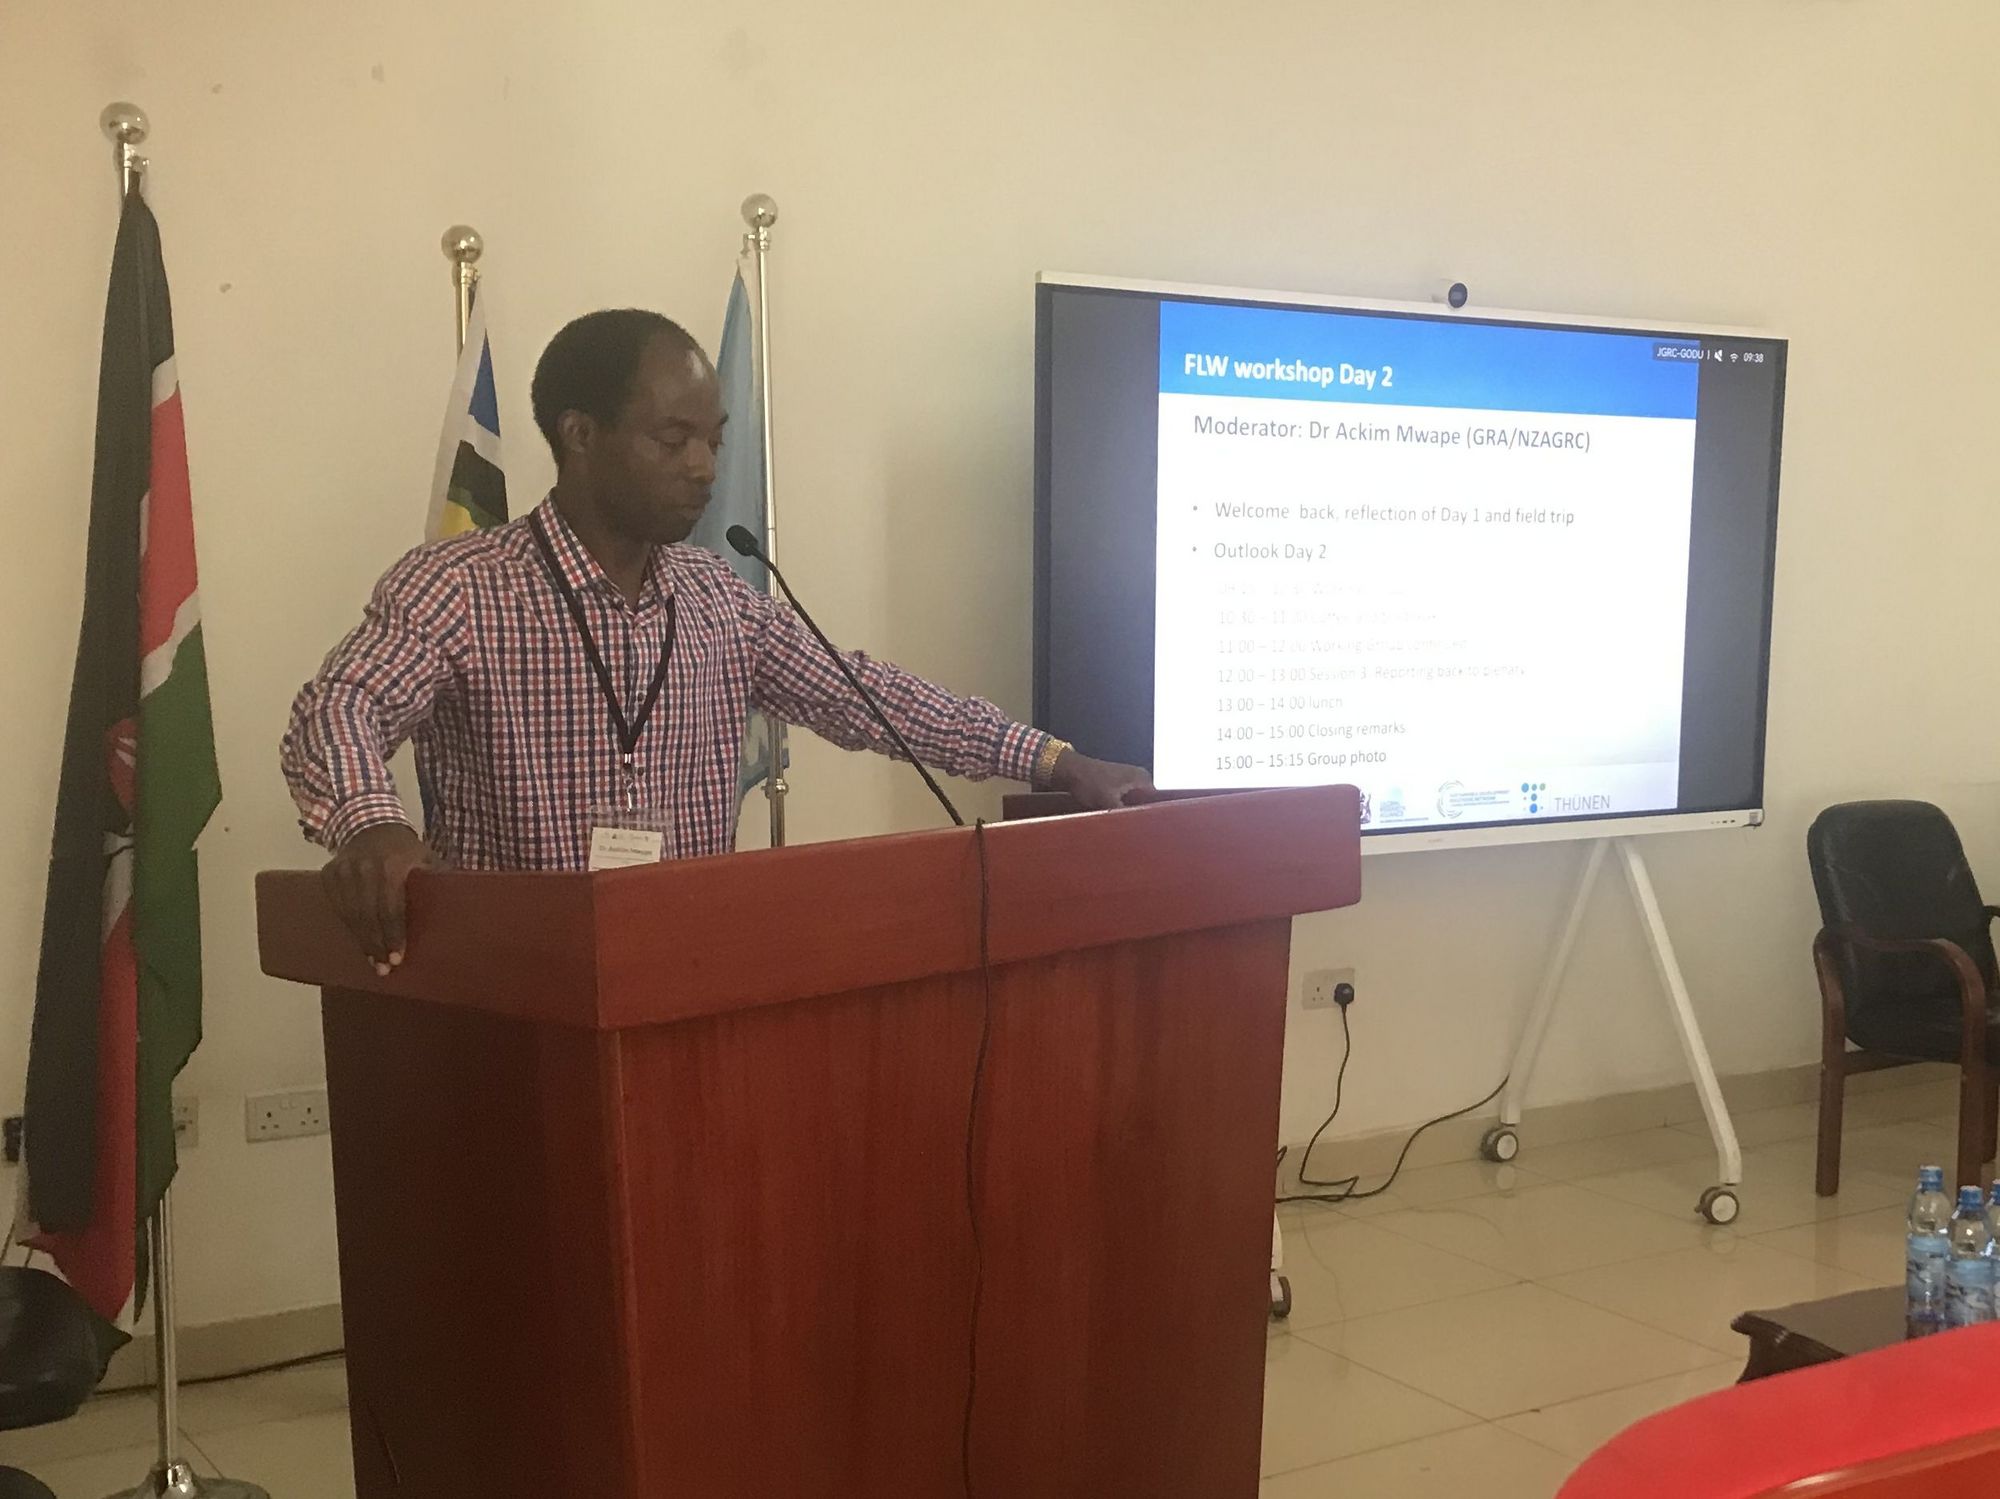 Dr Ackim Mwape (GRA) provides a summary of day 1 to the participants.